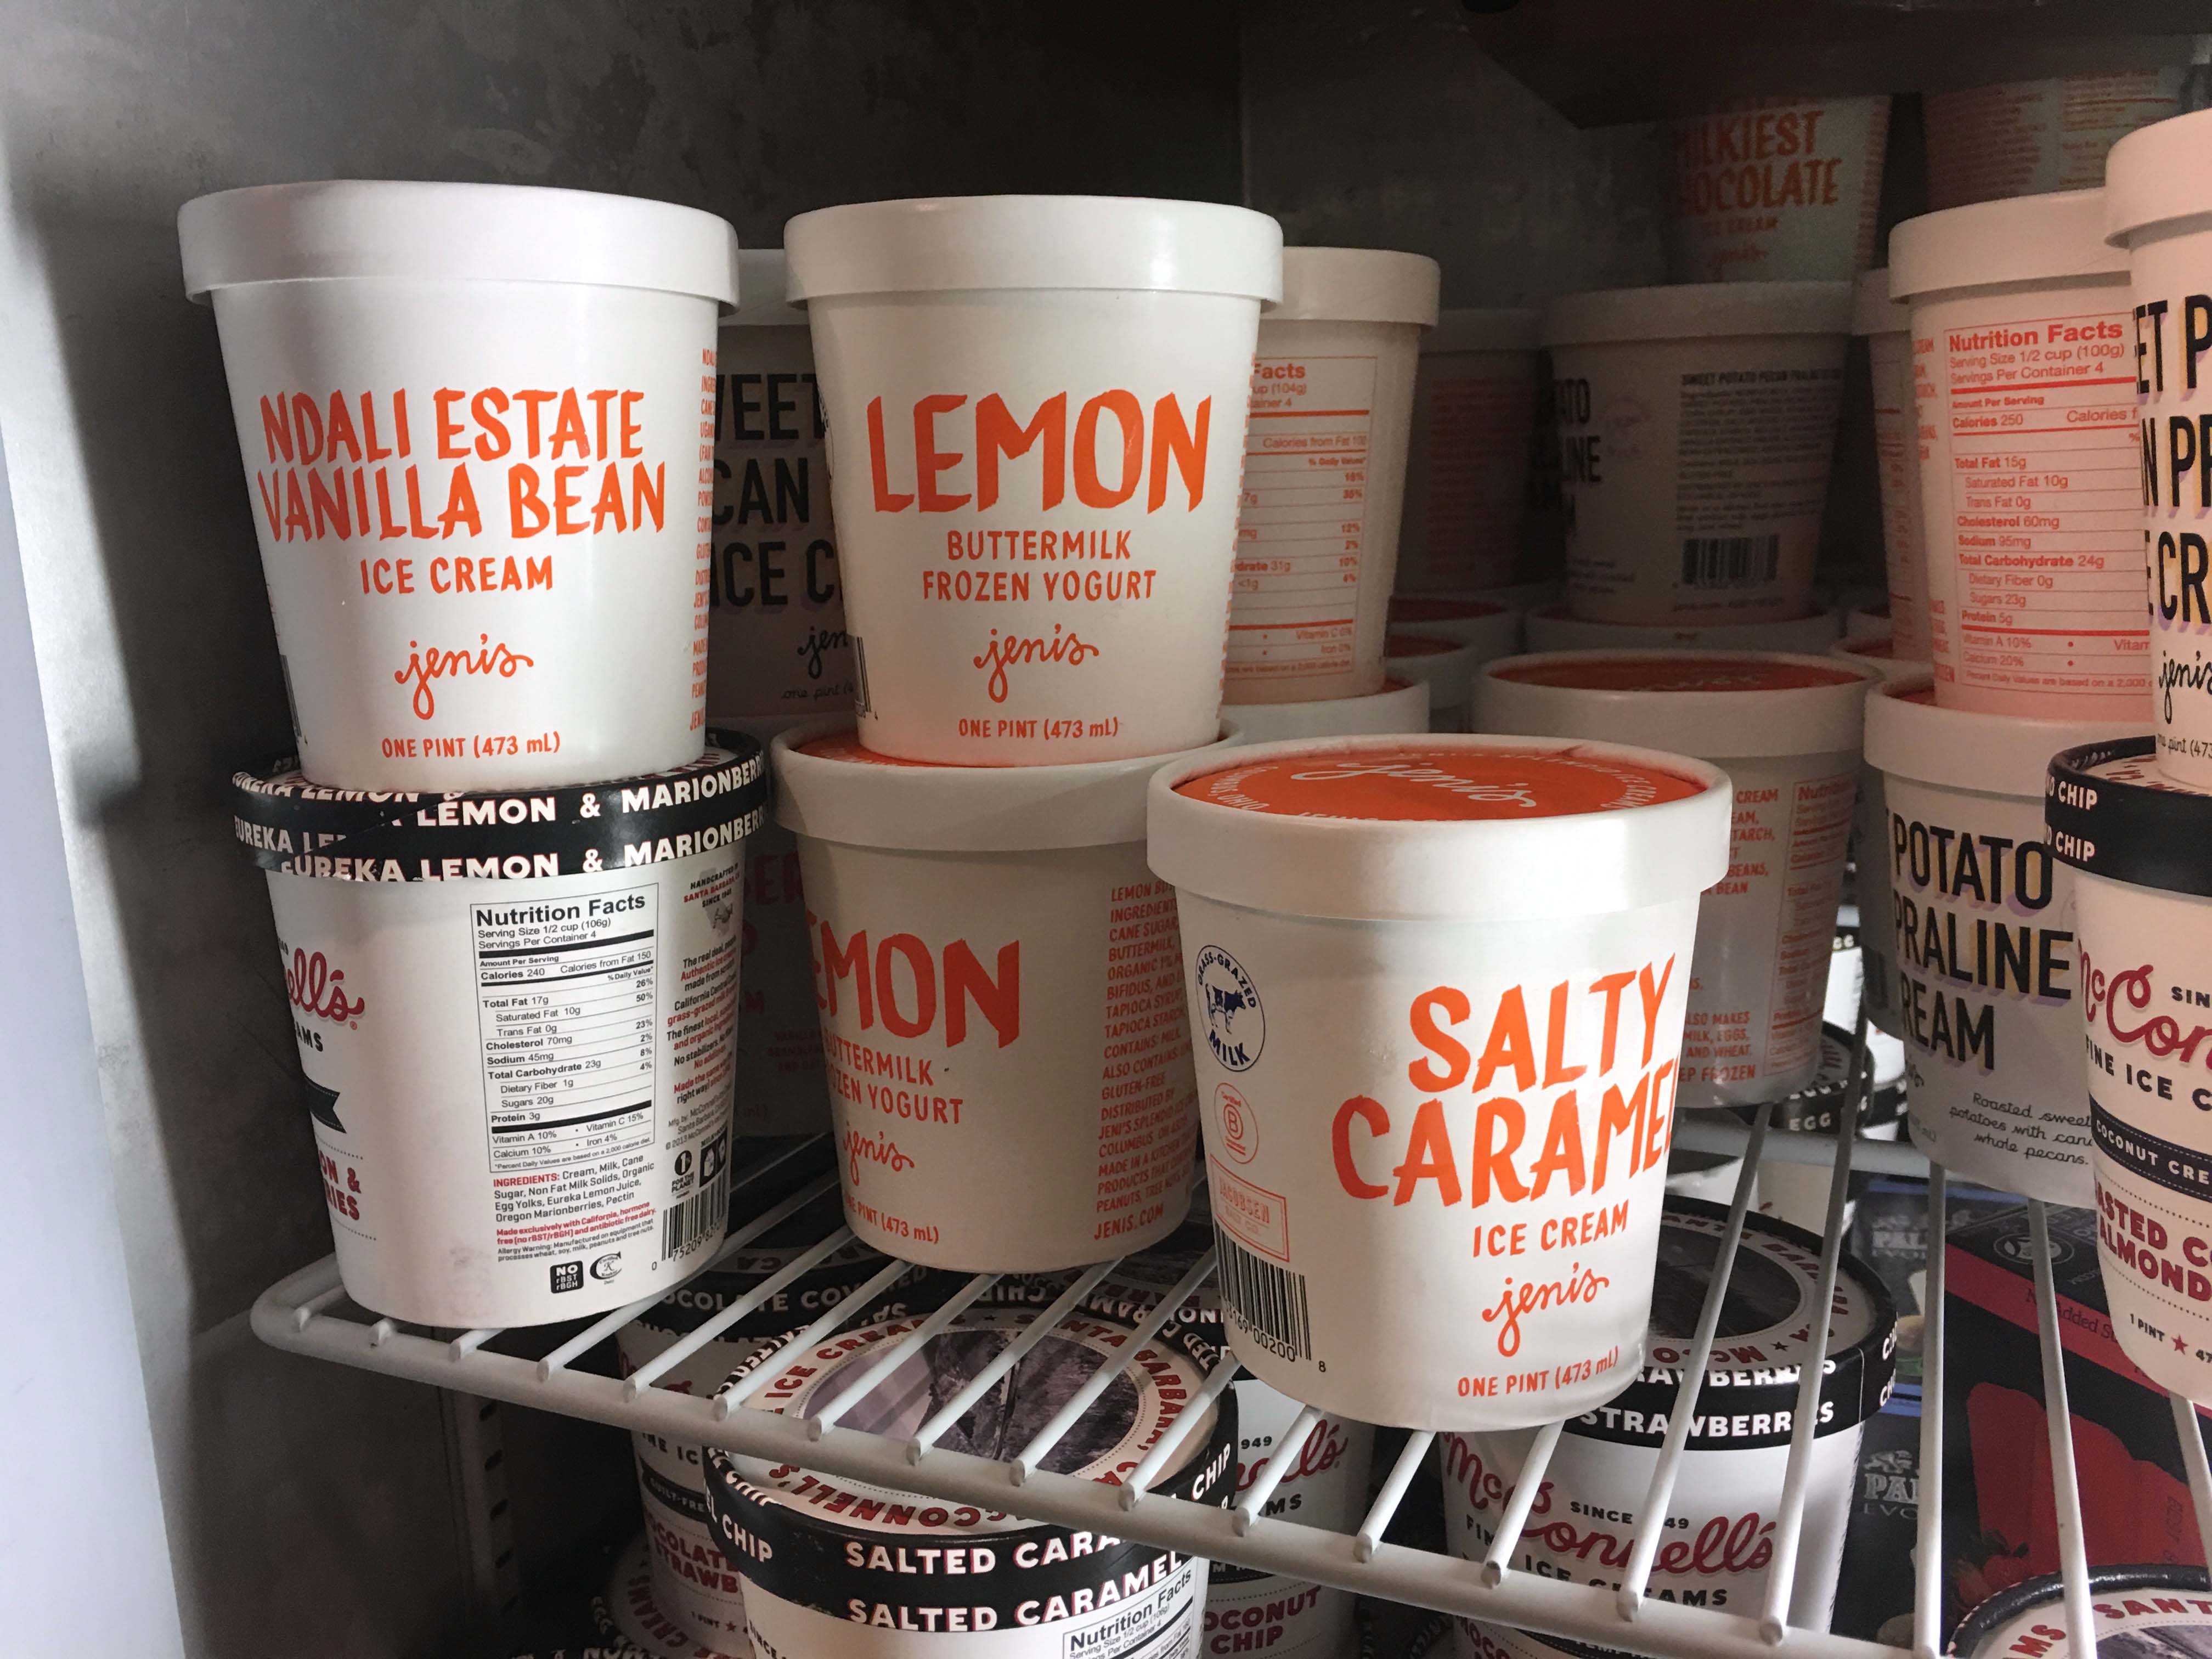 New Jenis containers